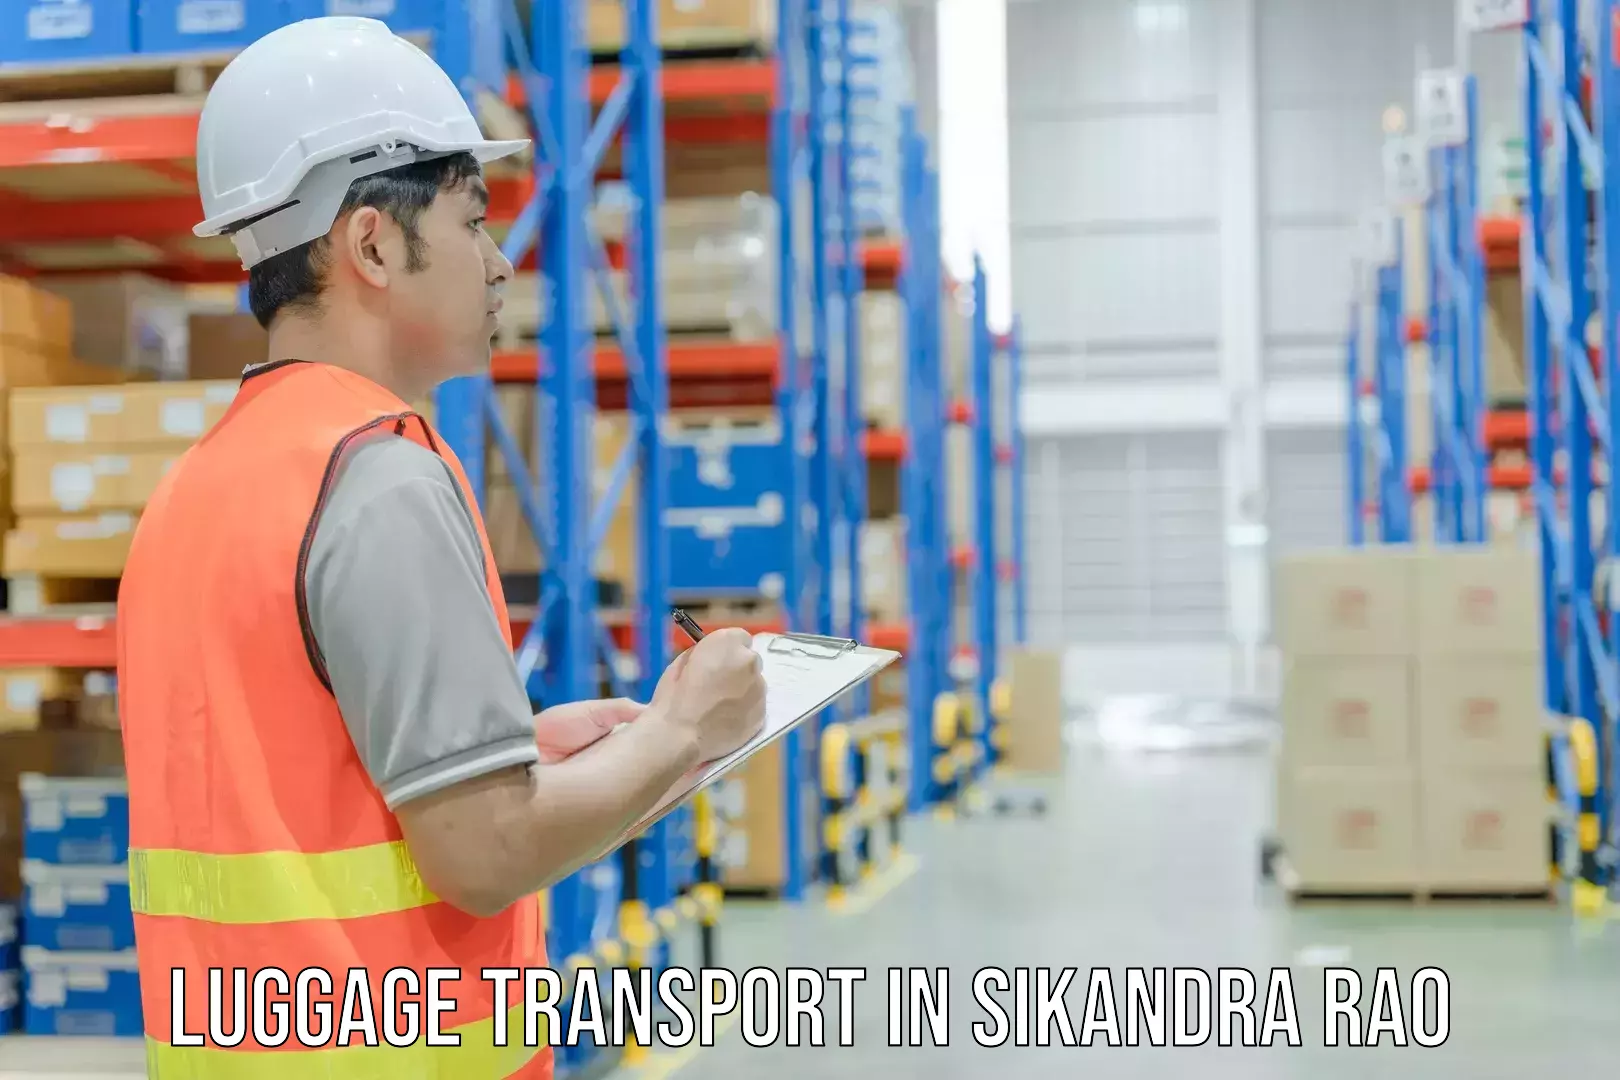 Baggage transport coordination in Sikandra Rao